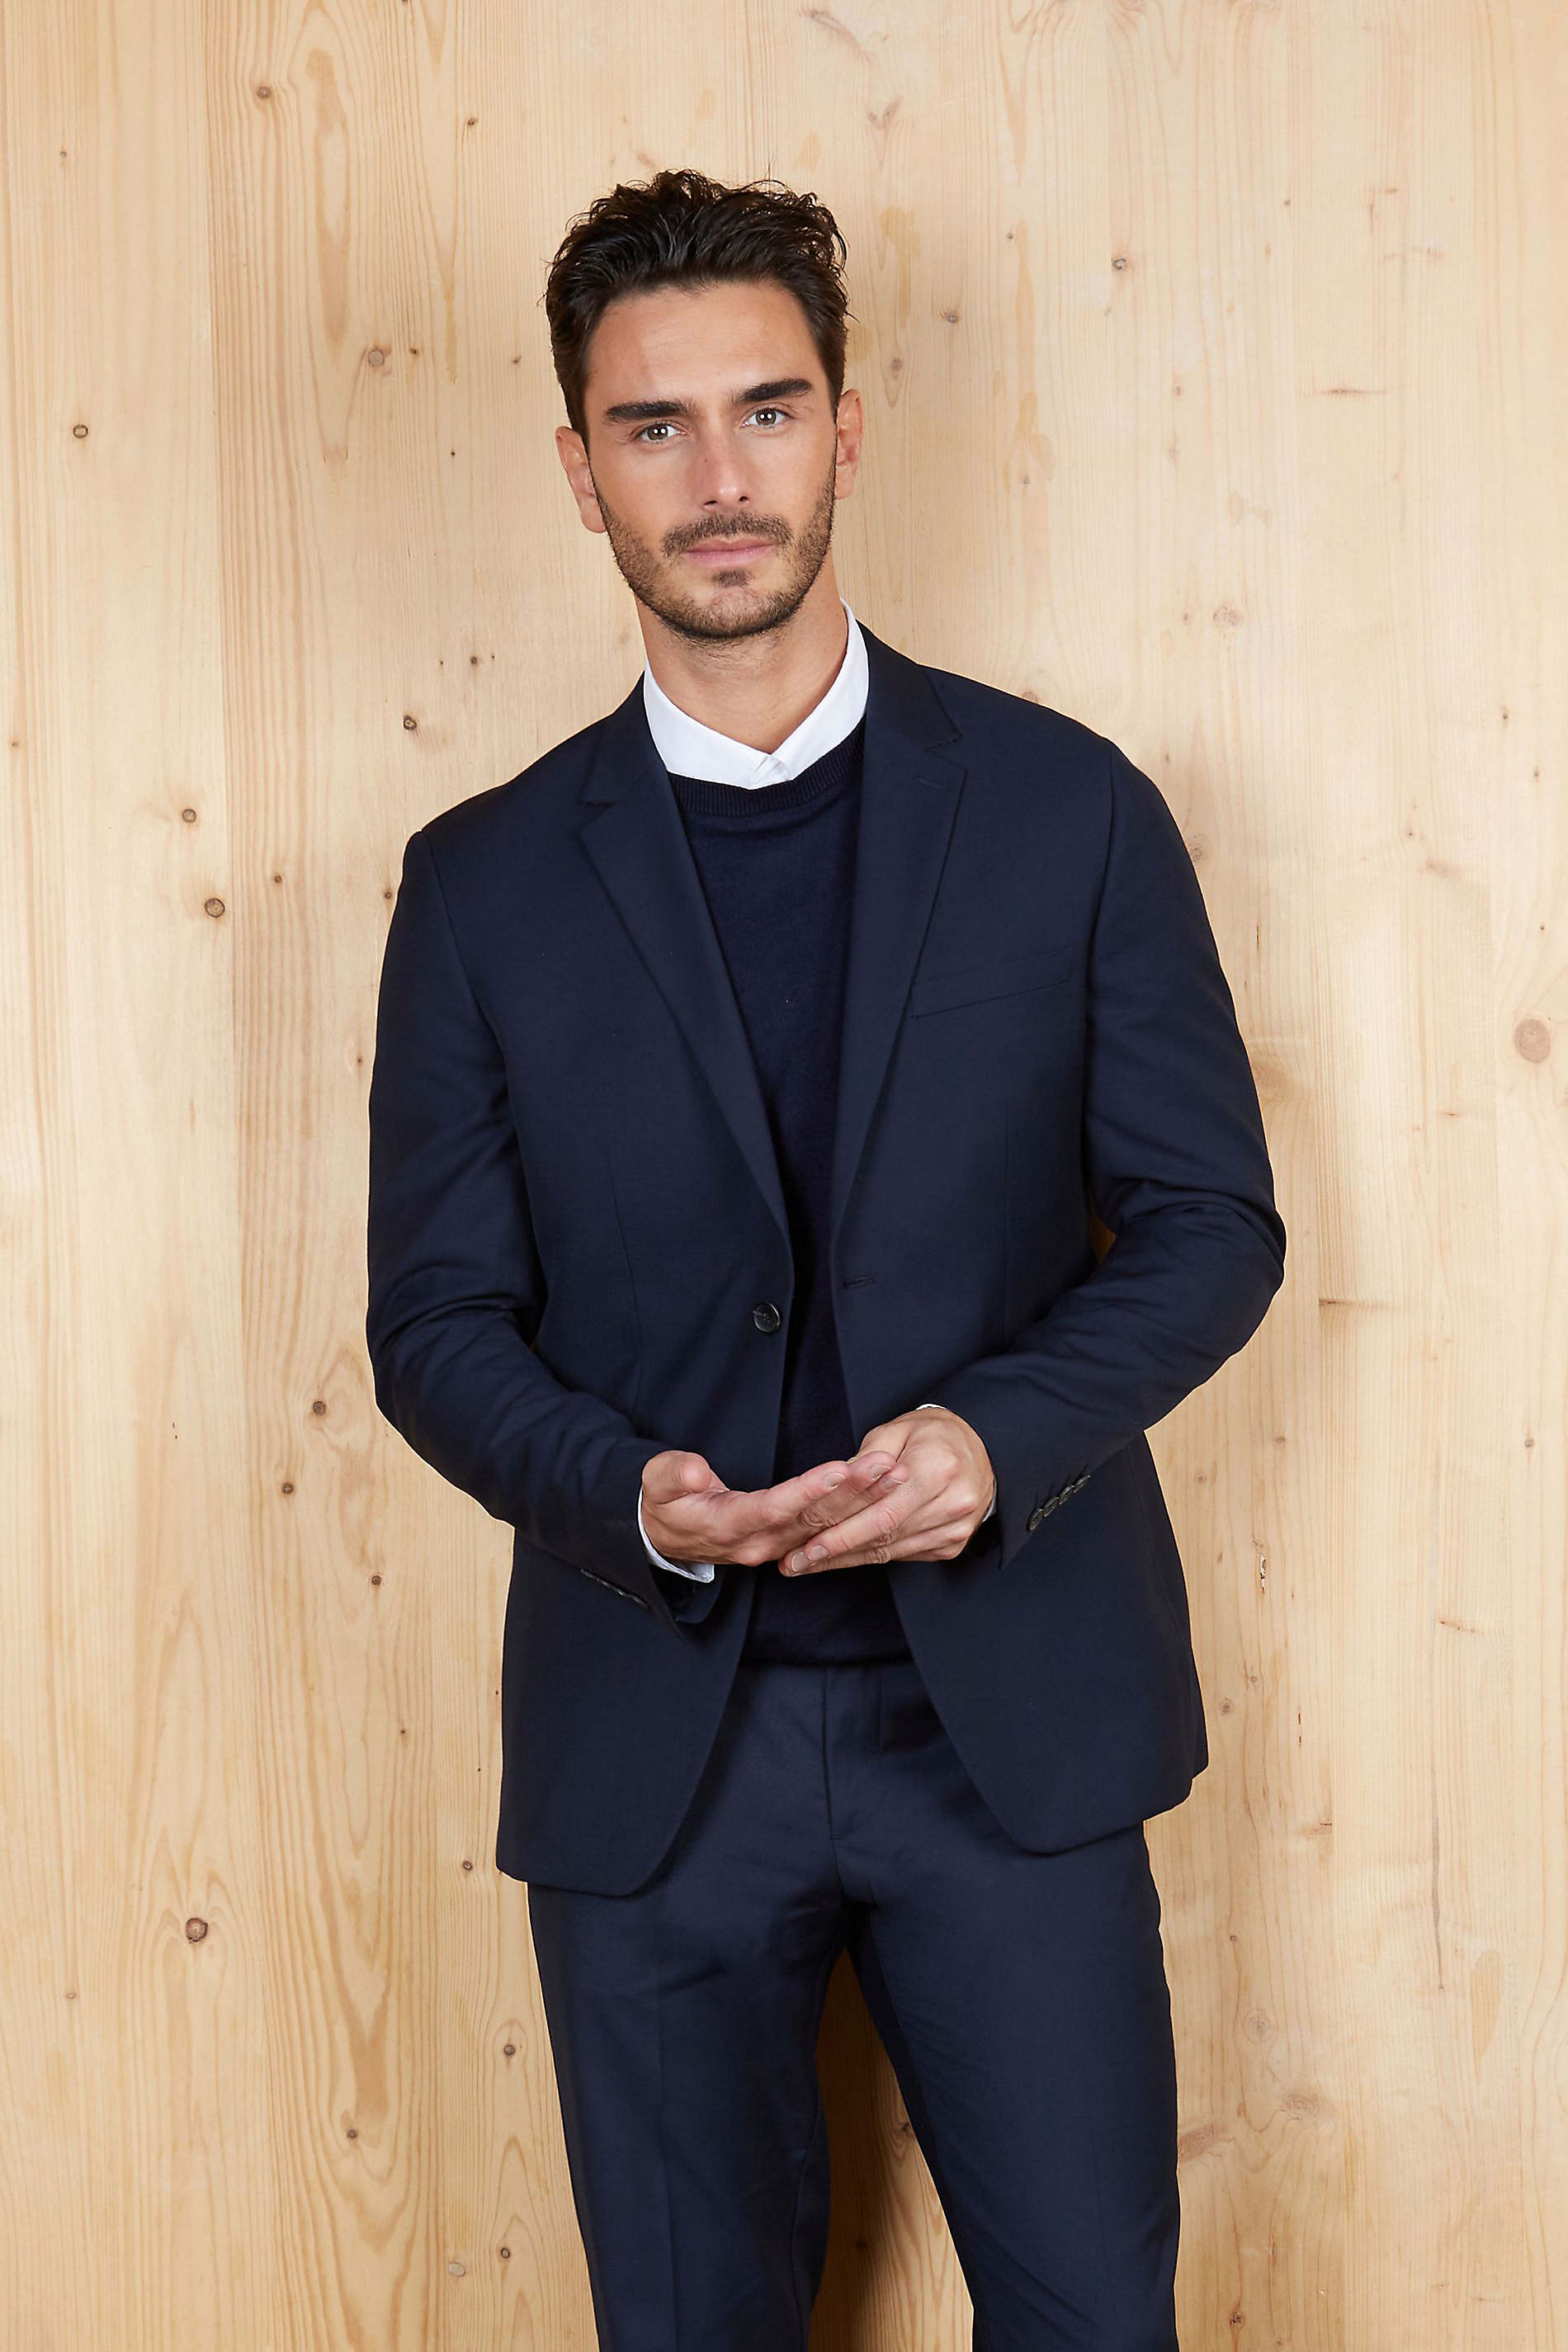 MEN'S SUIT JACKET<p>This elegant, timeless, mid-season suit jacket is an iconic garment and a staple of men's wardrobe. It can be worn as a part of a three-piece suit for formal events or with chinos for a casual style.</p> NEOBLU MARIUS MEN